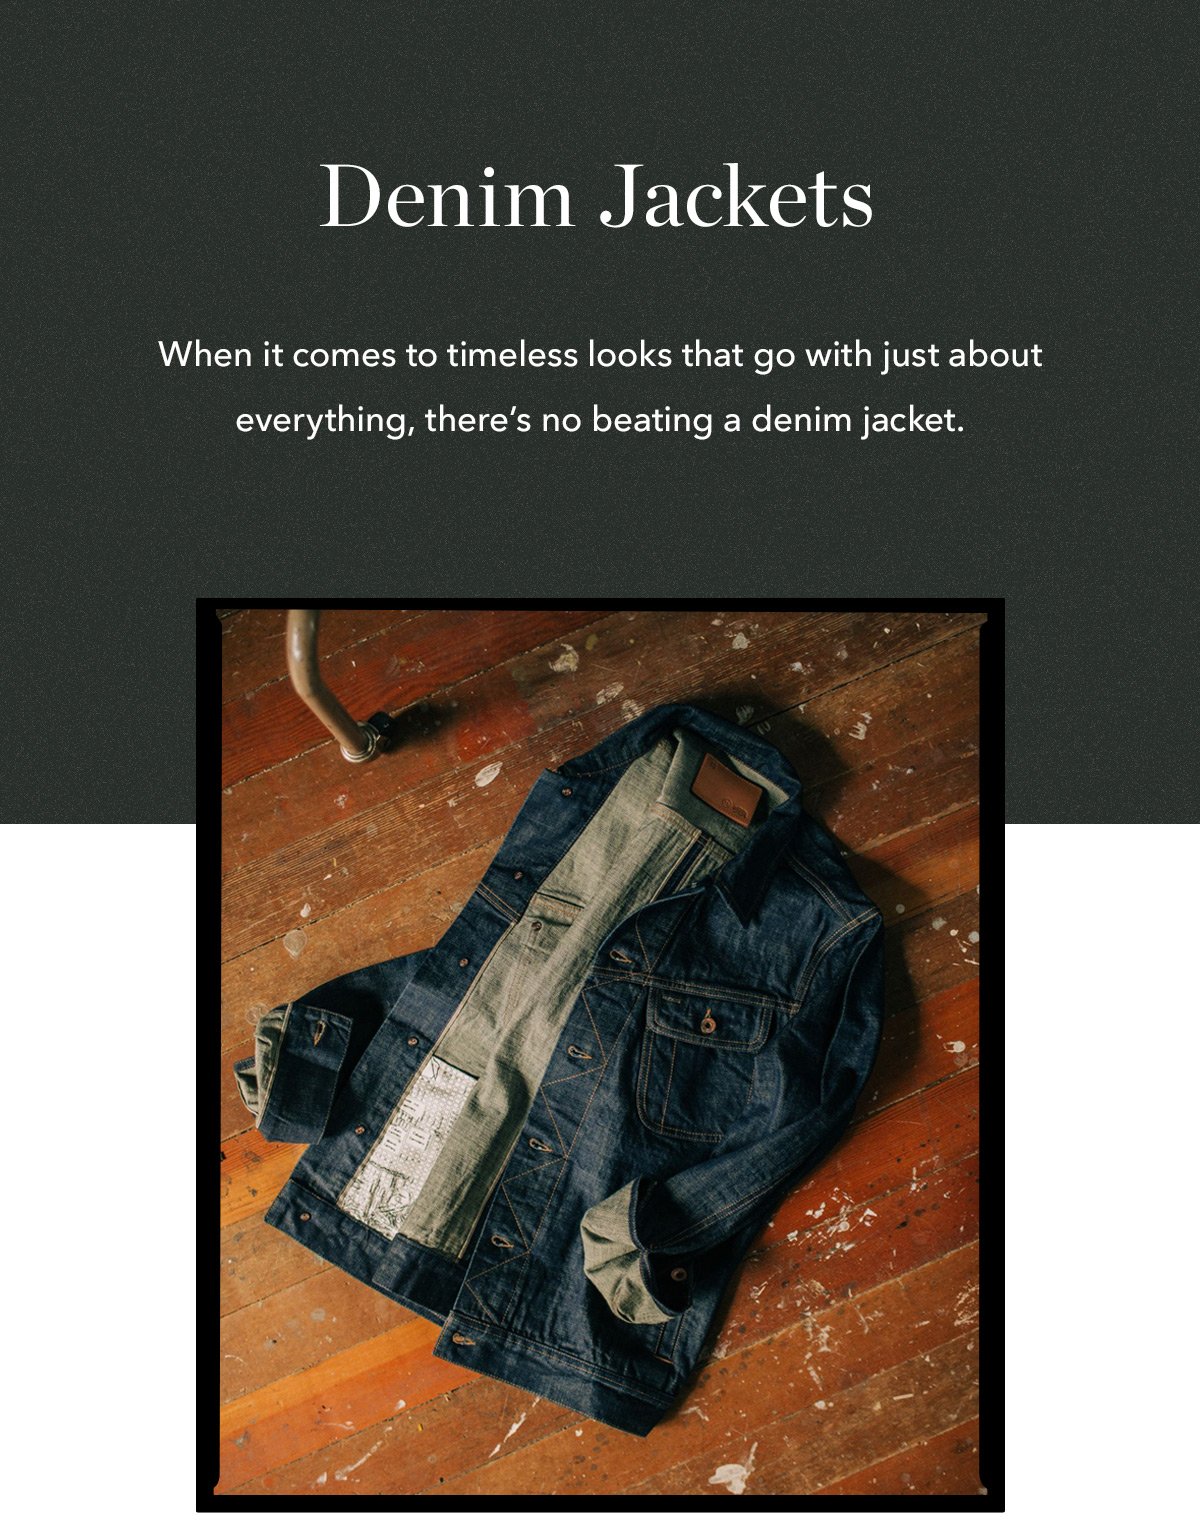 Denim Jackets: When it comes to timeless looks that go with just about everything, there's no beating a denim jacket.